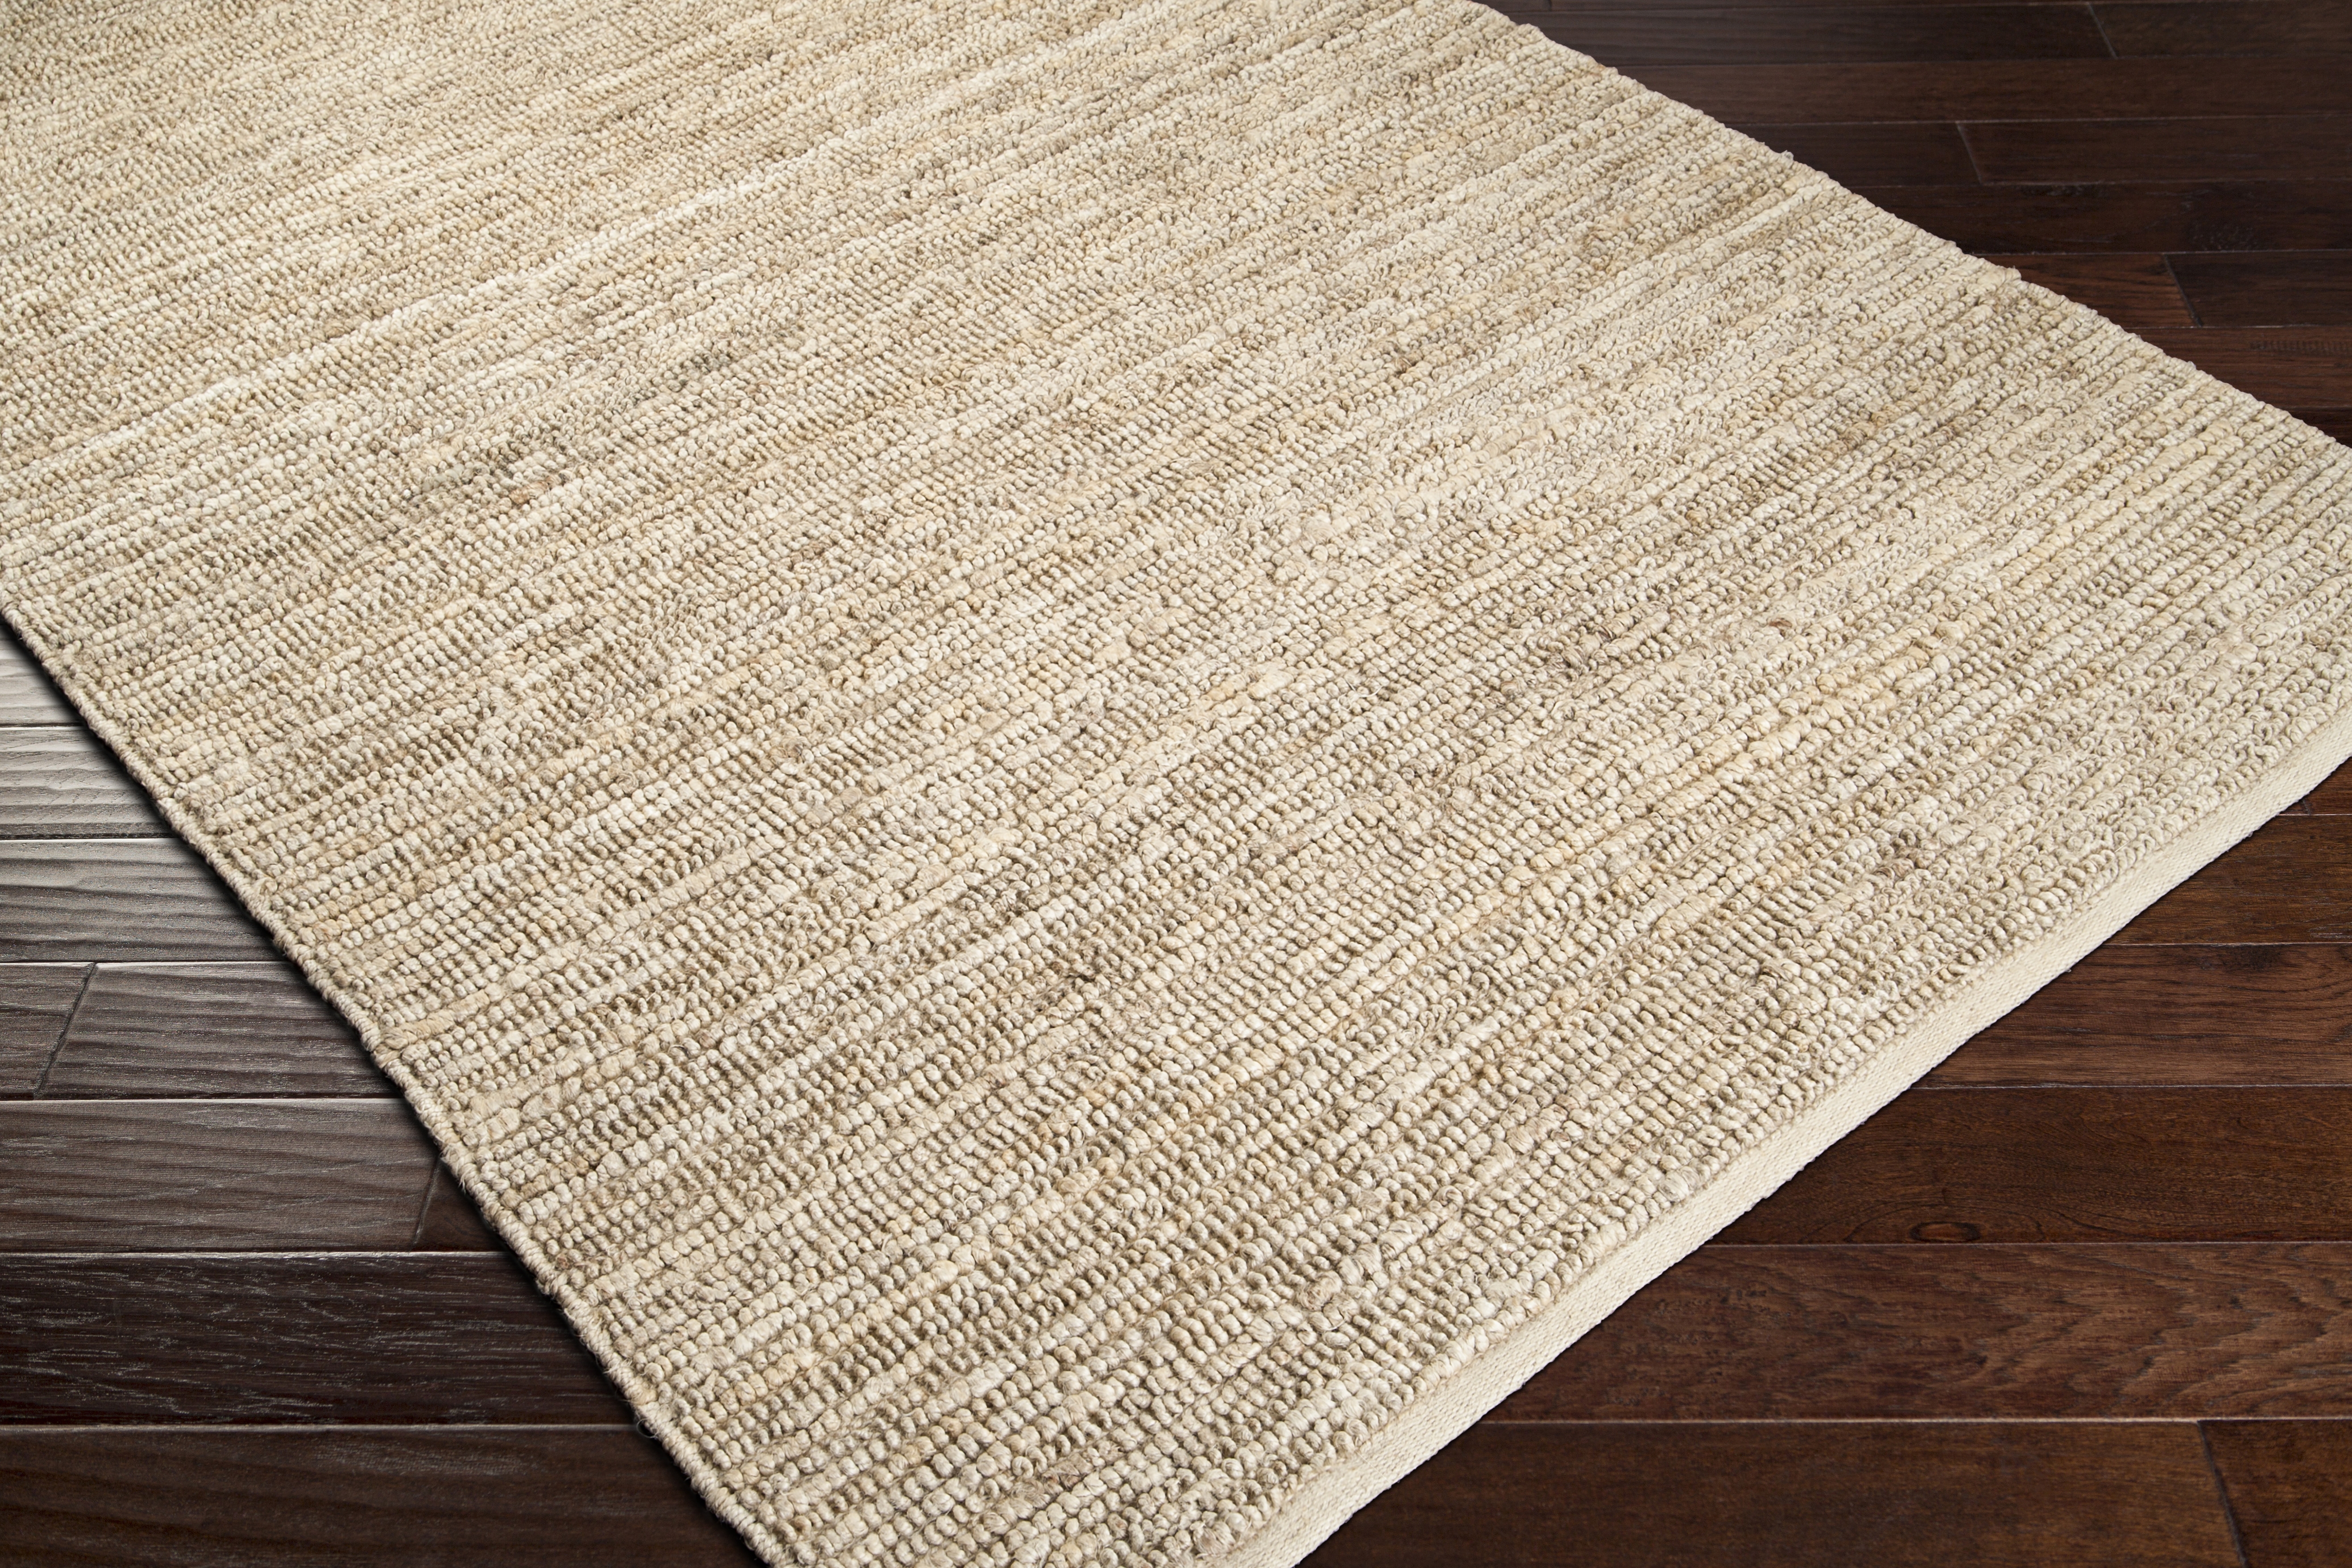 Continental Rug, 5' x 8' - Image 6